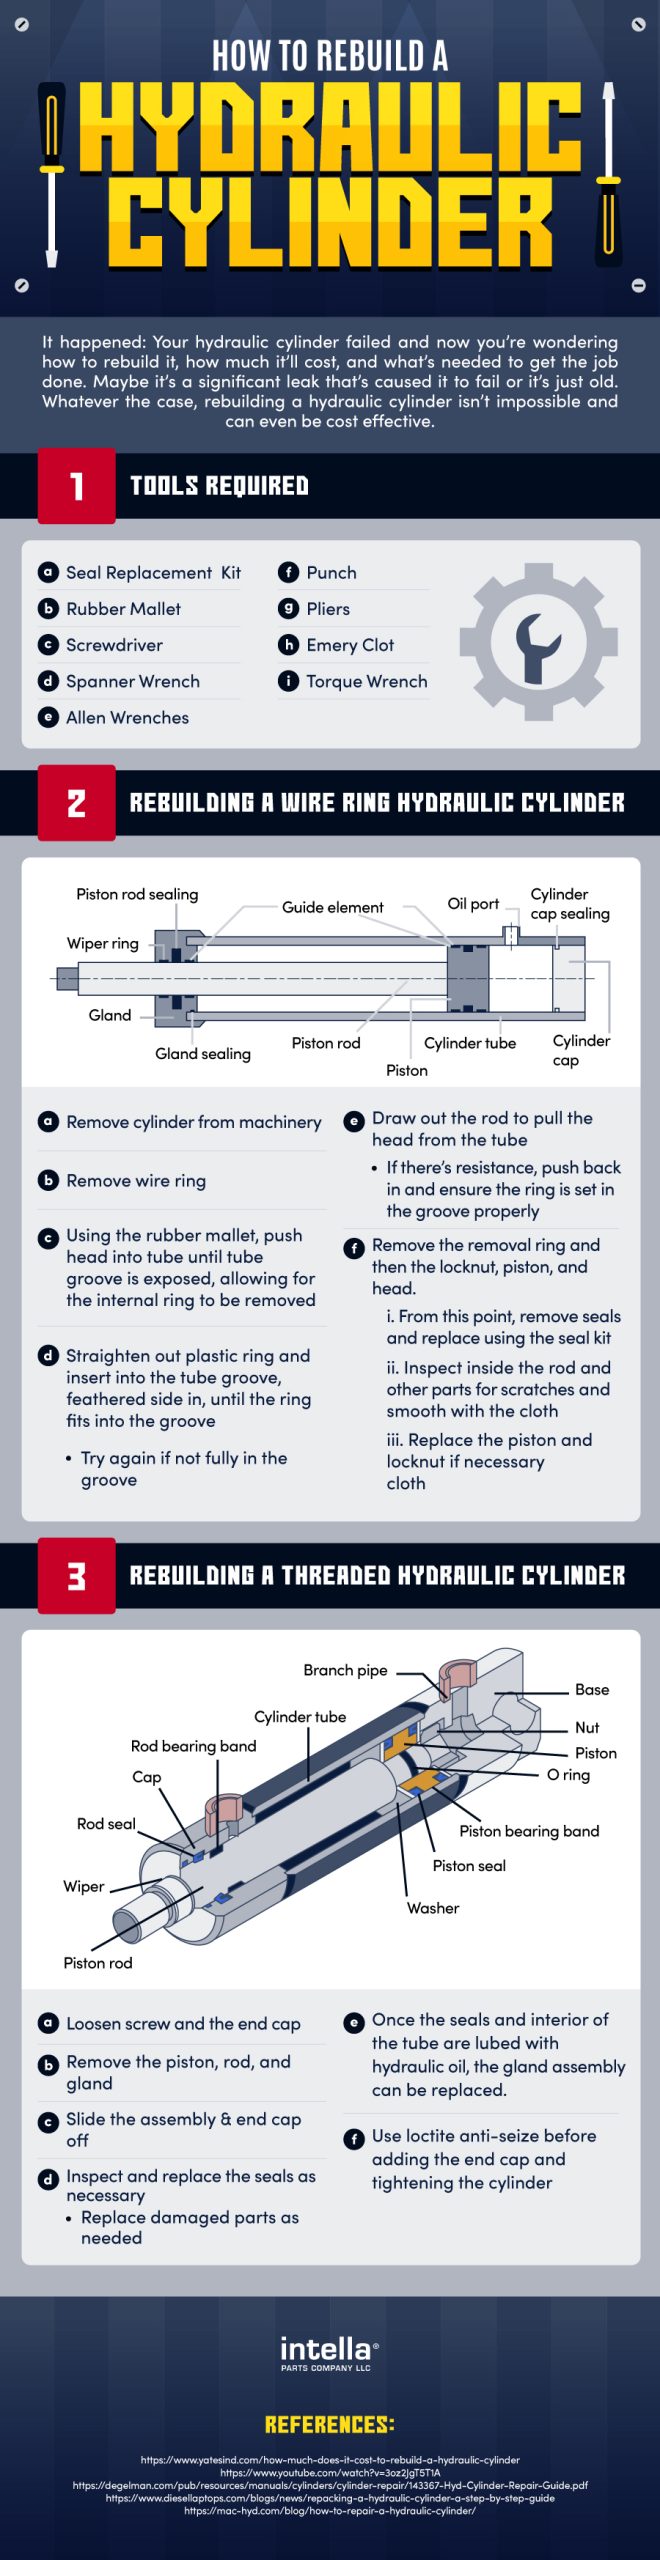 How to Rebuild a Hydraulic Cylinder